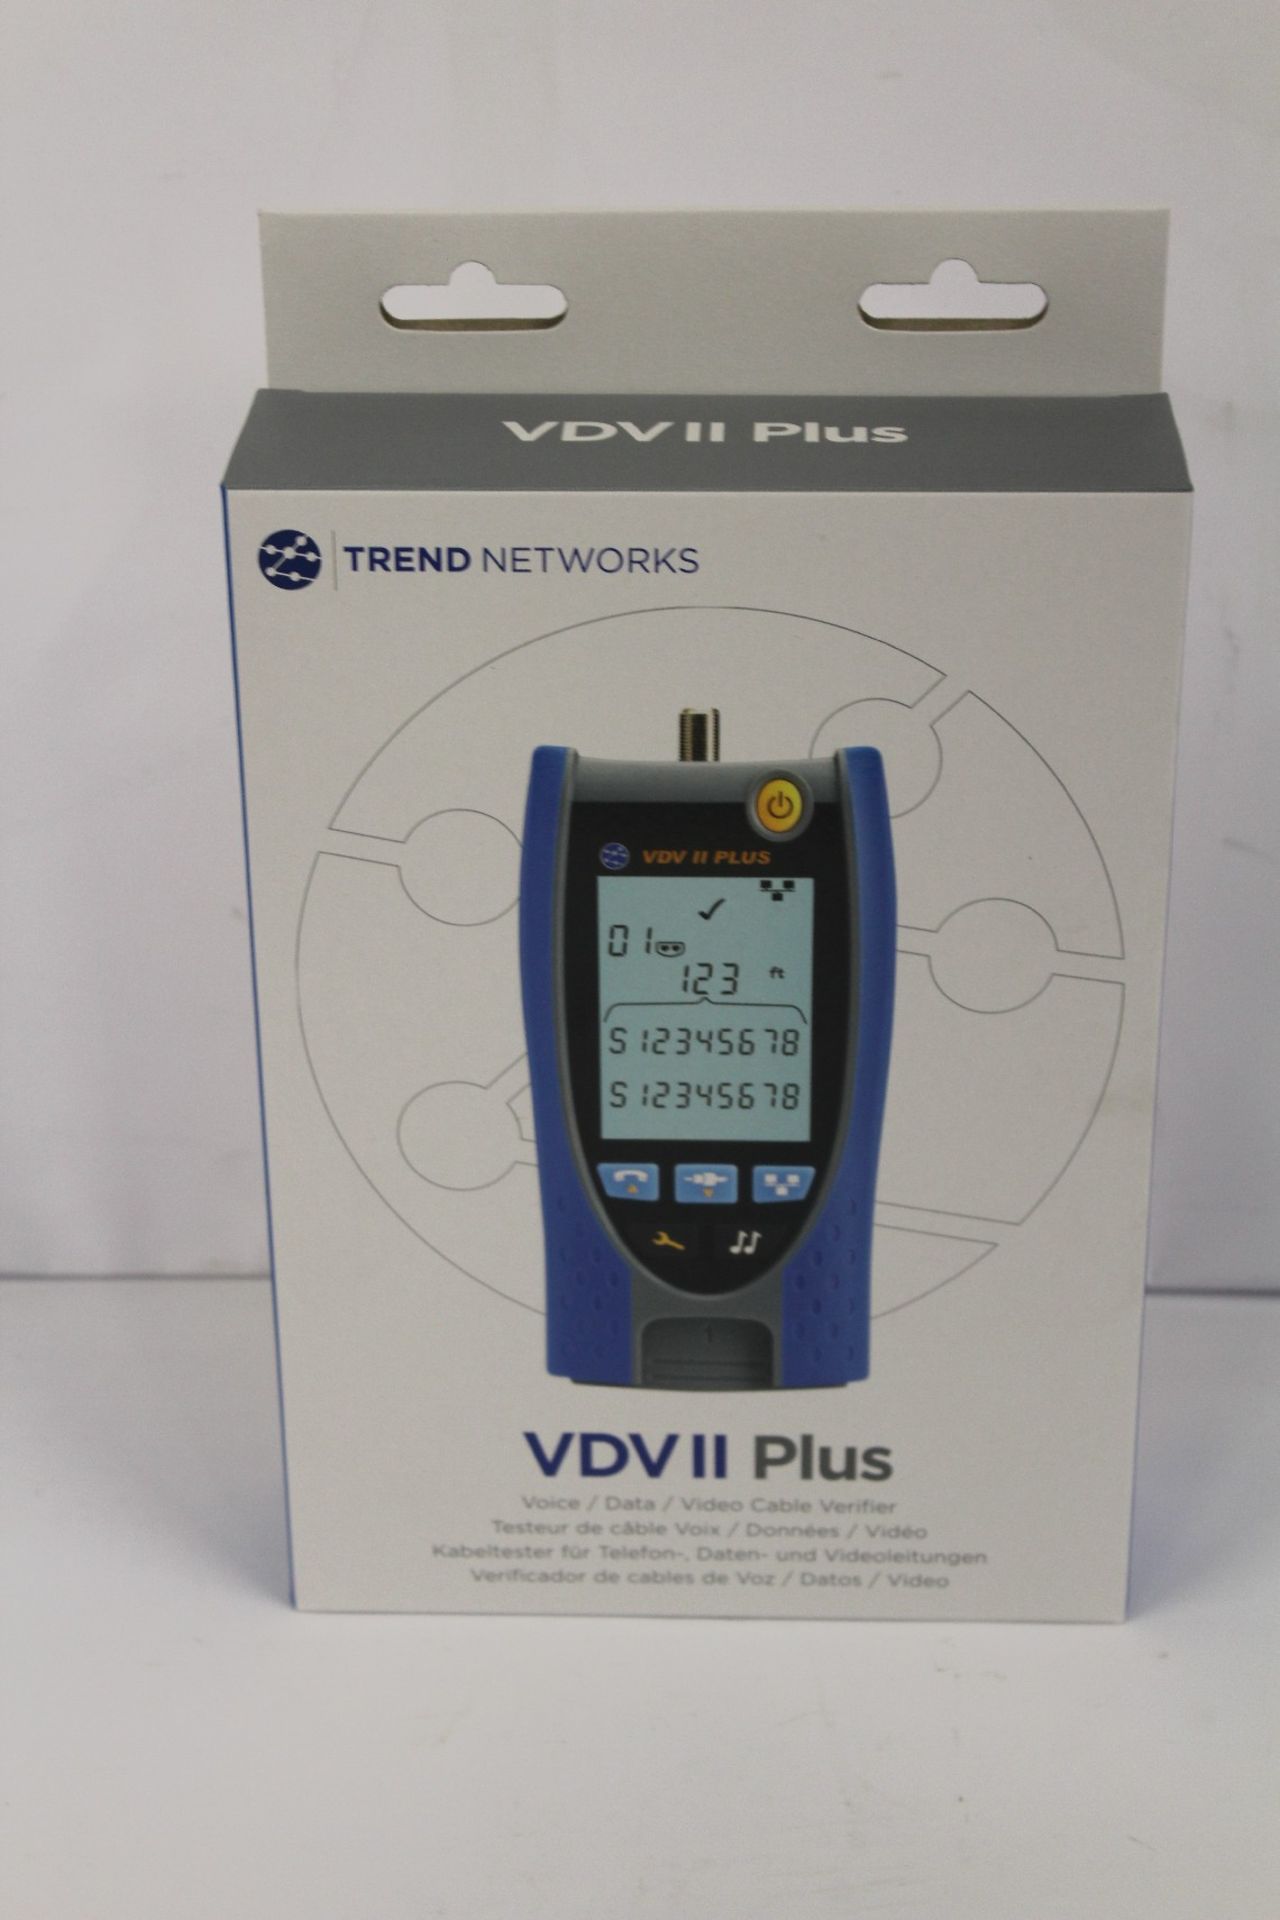 A boxed as new Trend Networks VDVII Plus voice/data/cable verifier (EAN: 783250764853).